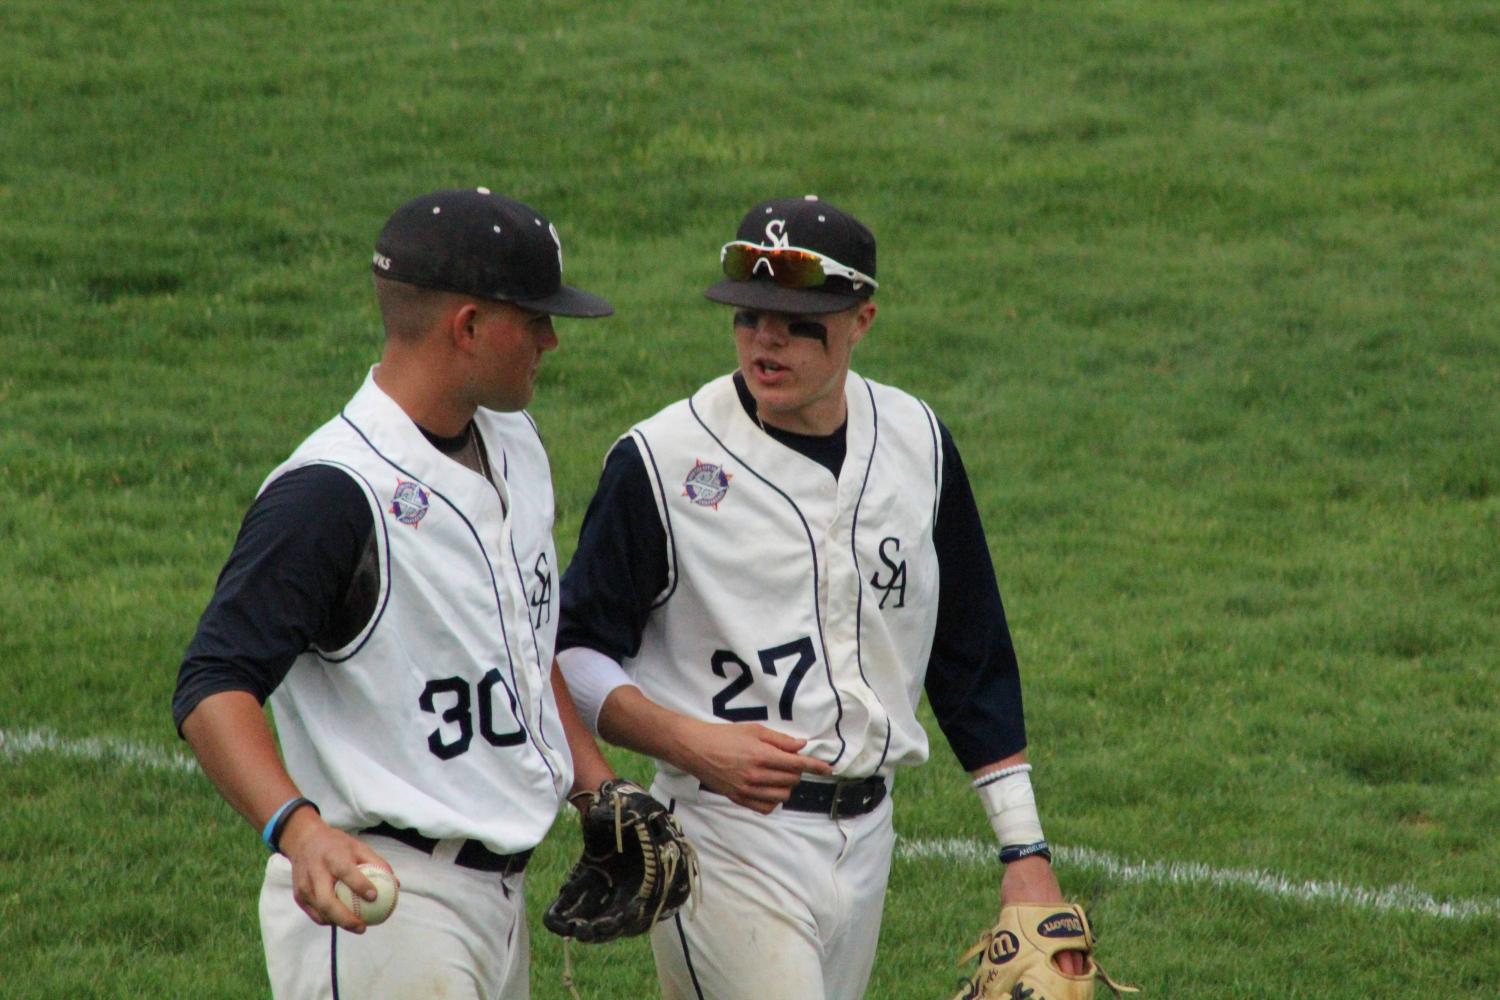 Sophomores Vincent Fortini (left) and Tyler McKeon (right) chatting on the field